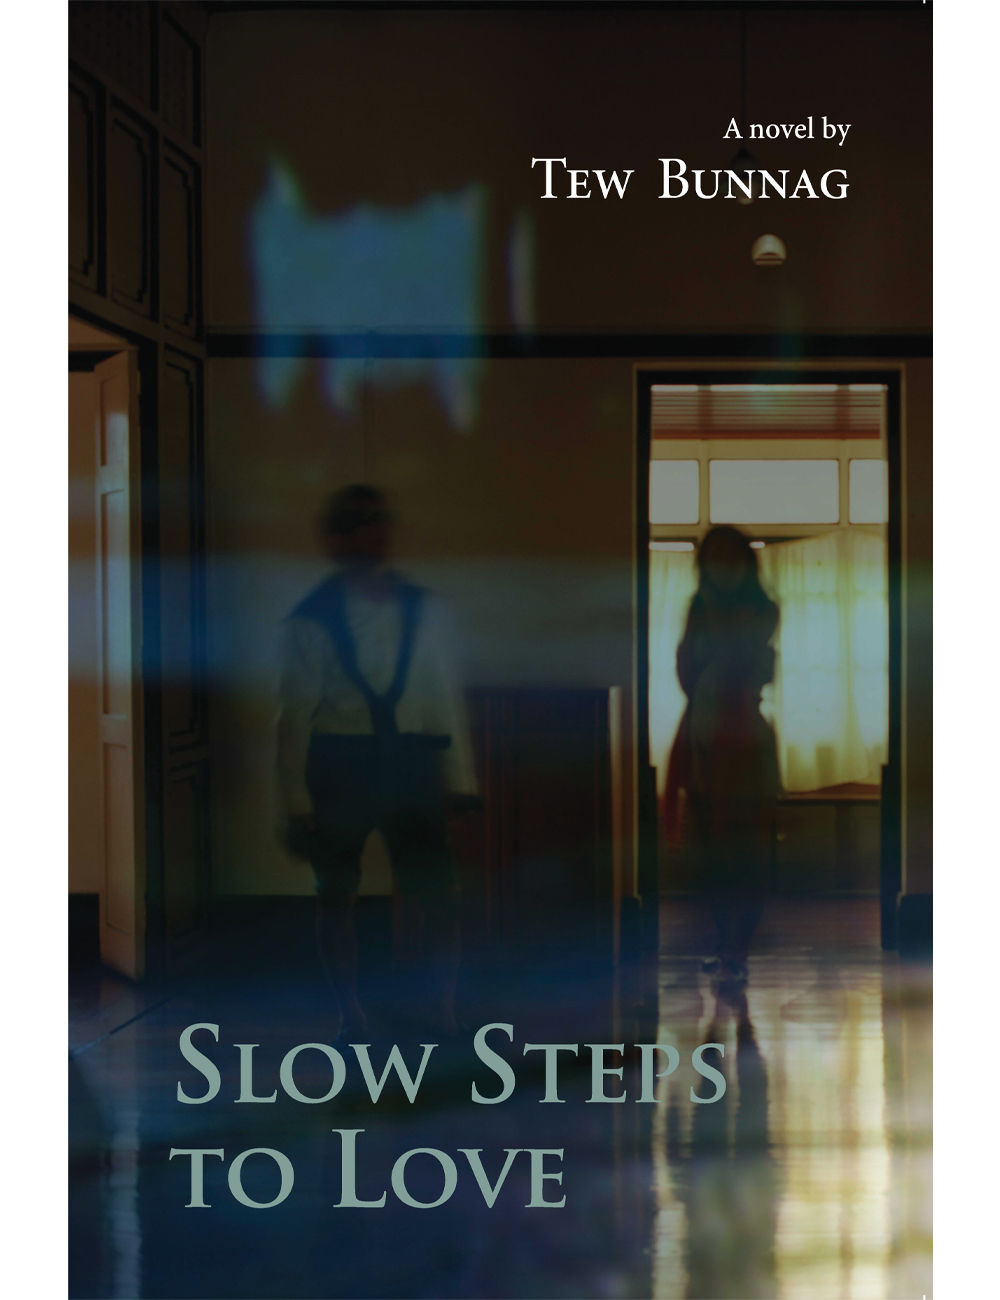 SLOW STEPS TO LOVE